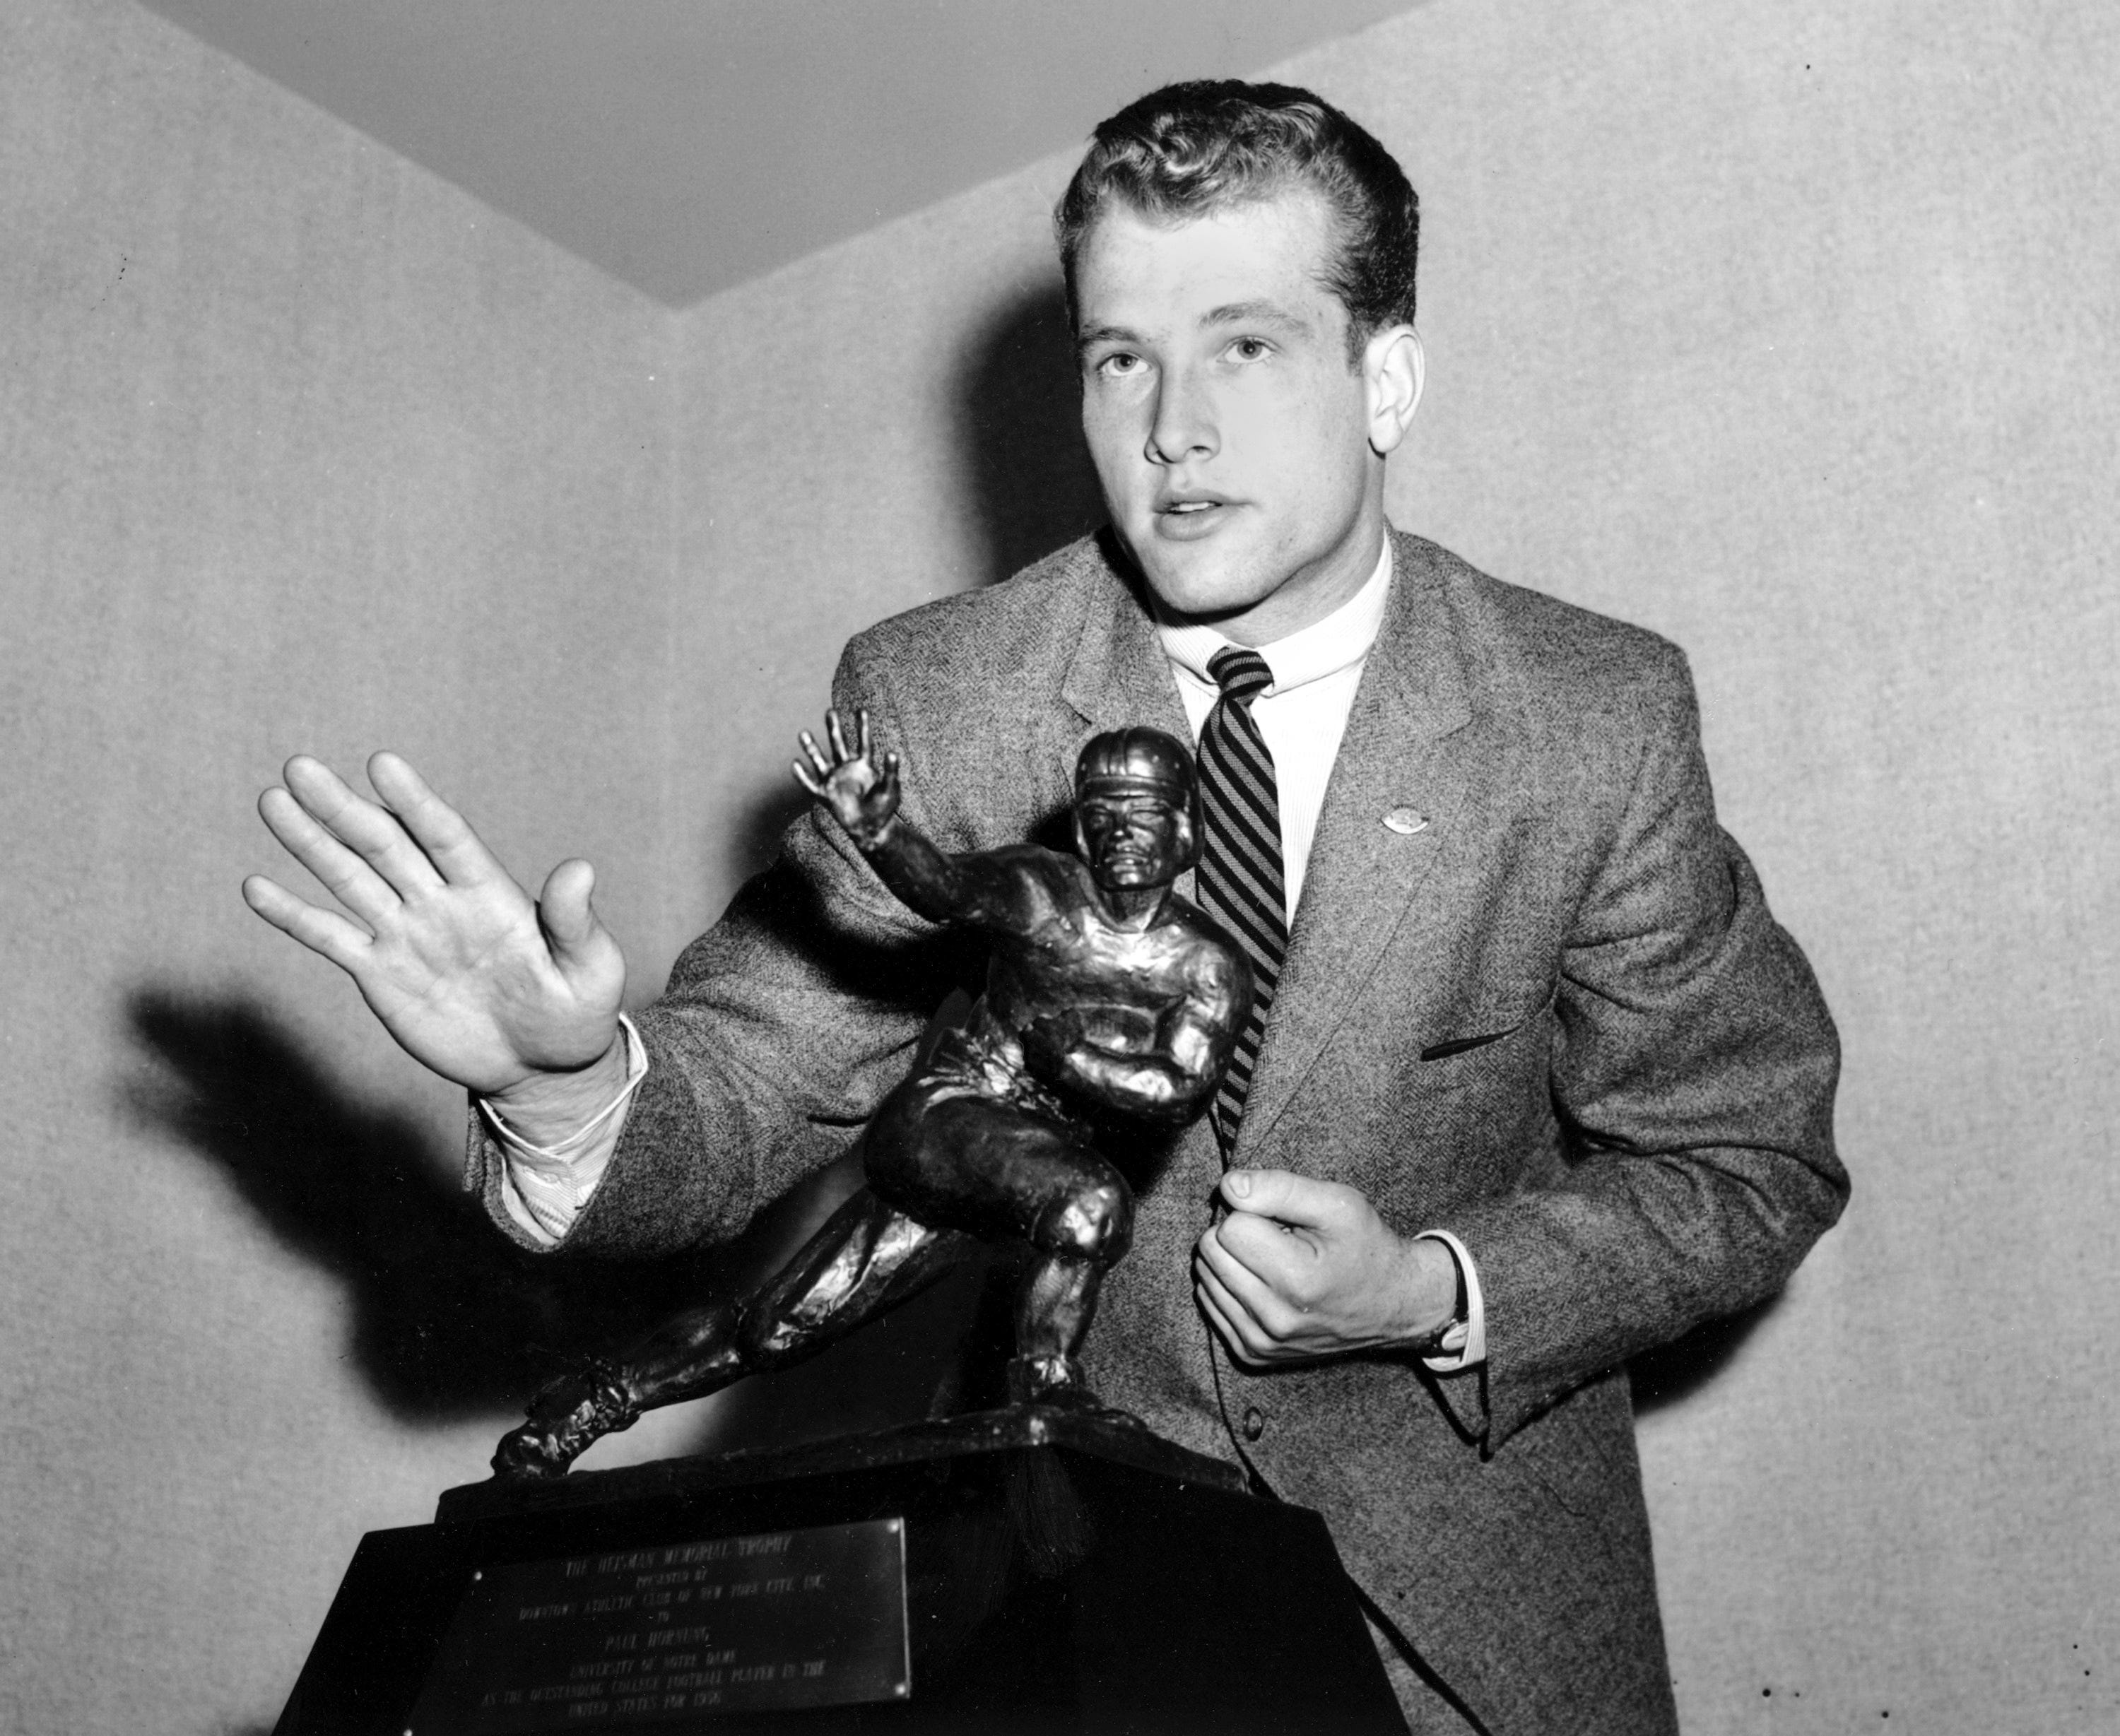 This Dec. 12. 1956, file photo shows Notre Dame quarterback Paul Hornung imitating the posture of the Heisman Trophy that he received at the Downtown Athletic Club in New York City. Hornung, the dazzling “Golden Boy” of the Green Bay Packers whose singular ability to generate points as a runner, receiver, quarterback, and kicker helped turn them into an NFL dynasty, has died, Friday, Nov. 13, 2020. He was 84.